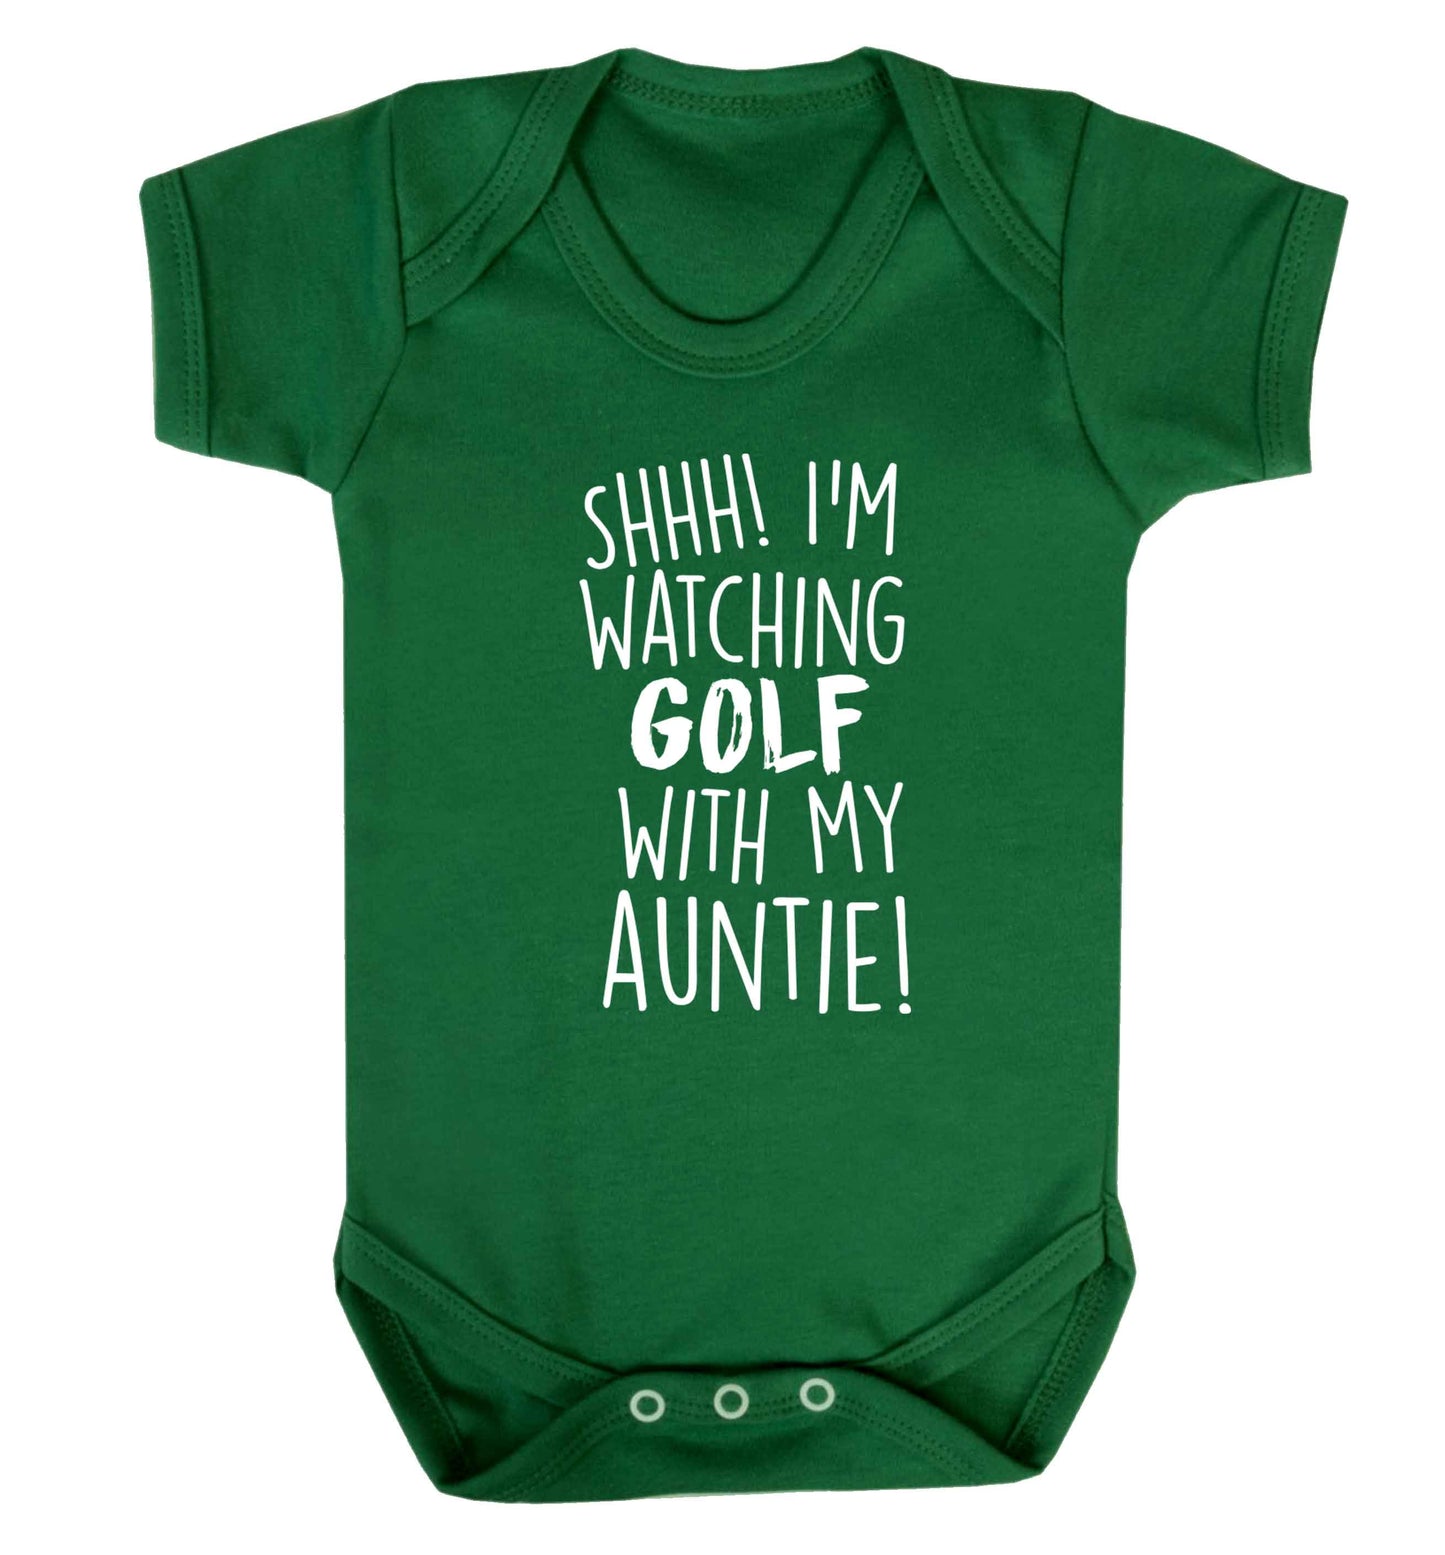 Shh I'm watching golf with my auntie Baby Vest green 18-24 months